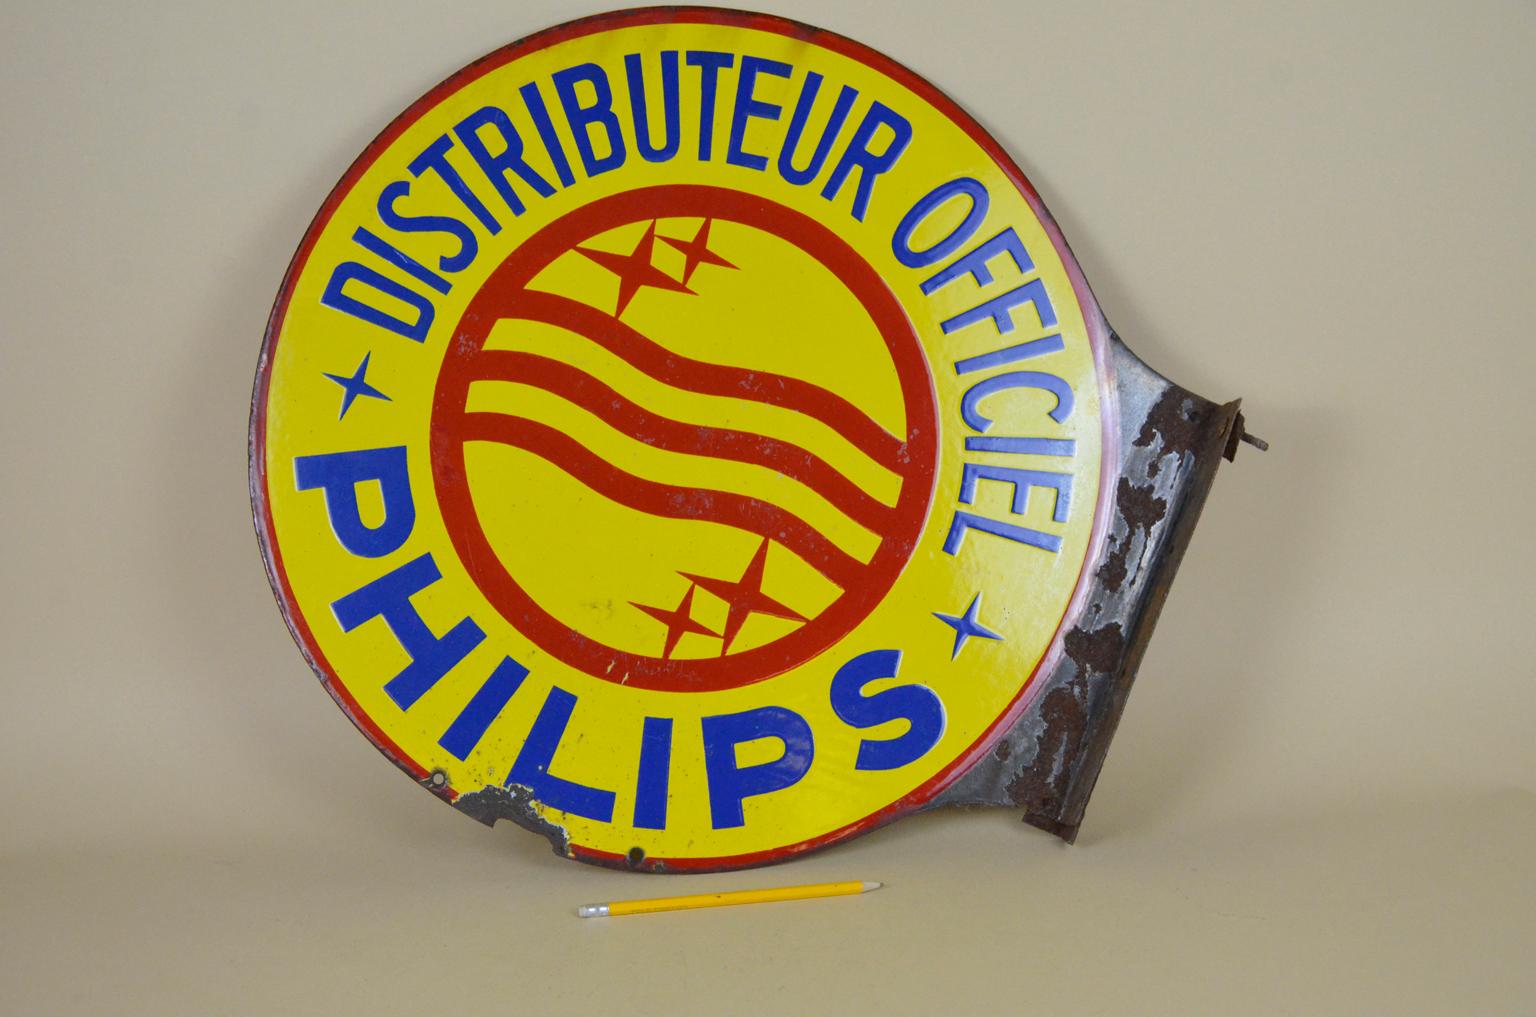 Vintage round double sided advertising Philips enamel metal sign in yellow and red.
Produced by Émaillerie Alsacienne Strasbourg Oenheim in the 1950s.

The sign was used in France by the official resellers (distributeur officiel) of Dutch